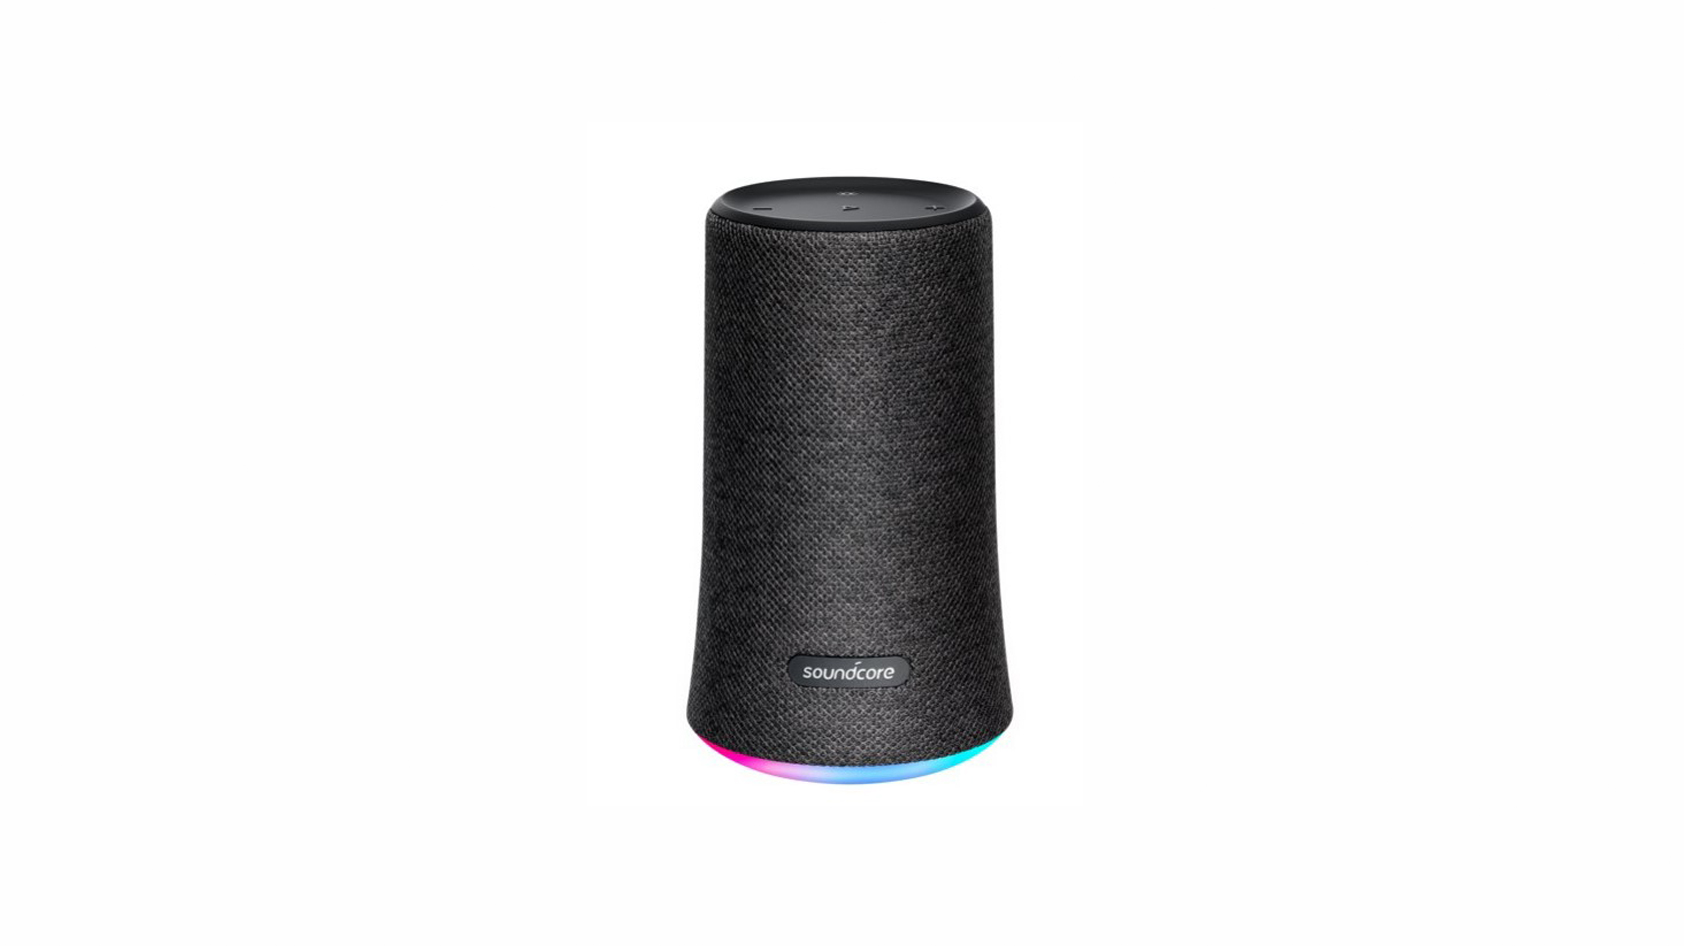 Anker Soundcore Flare set against a blank background.